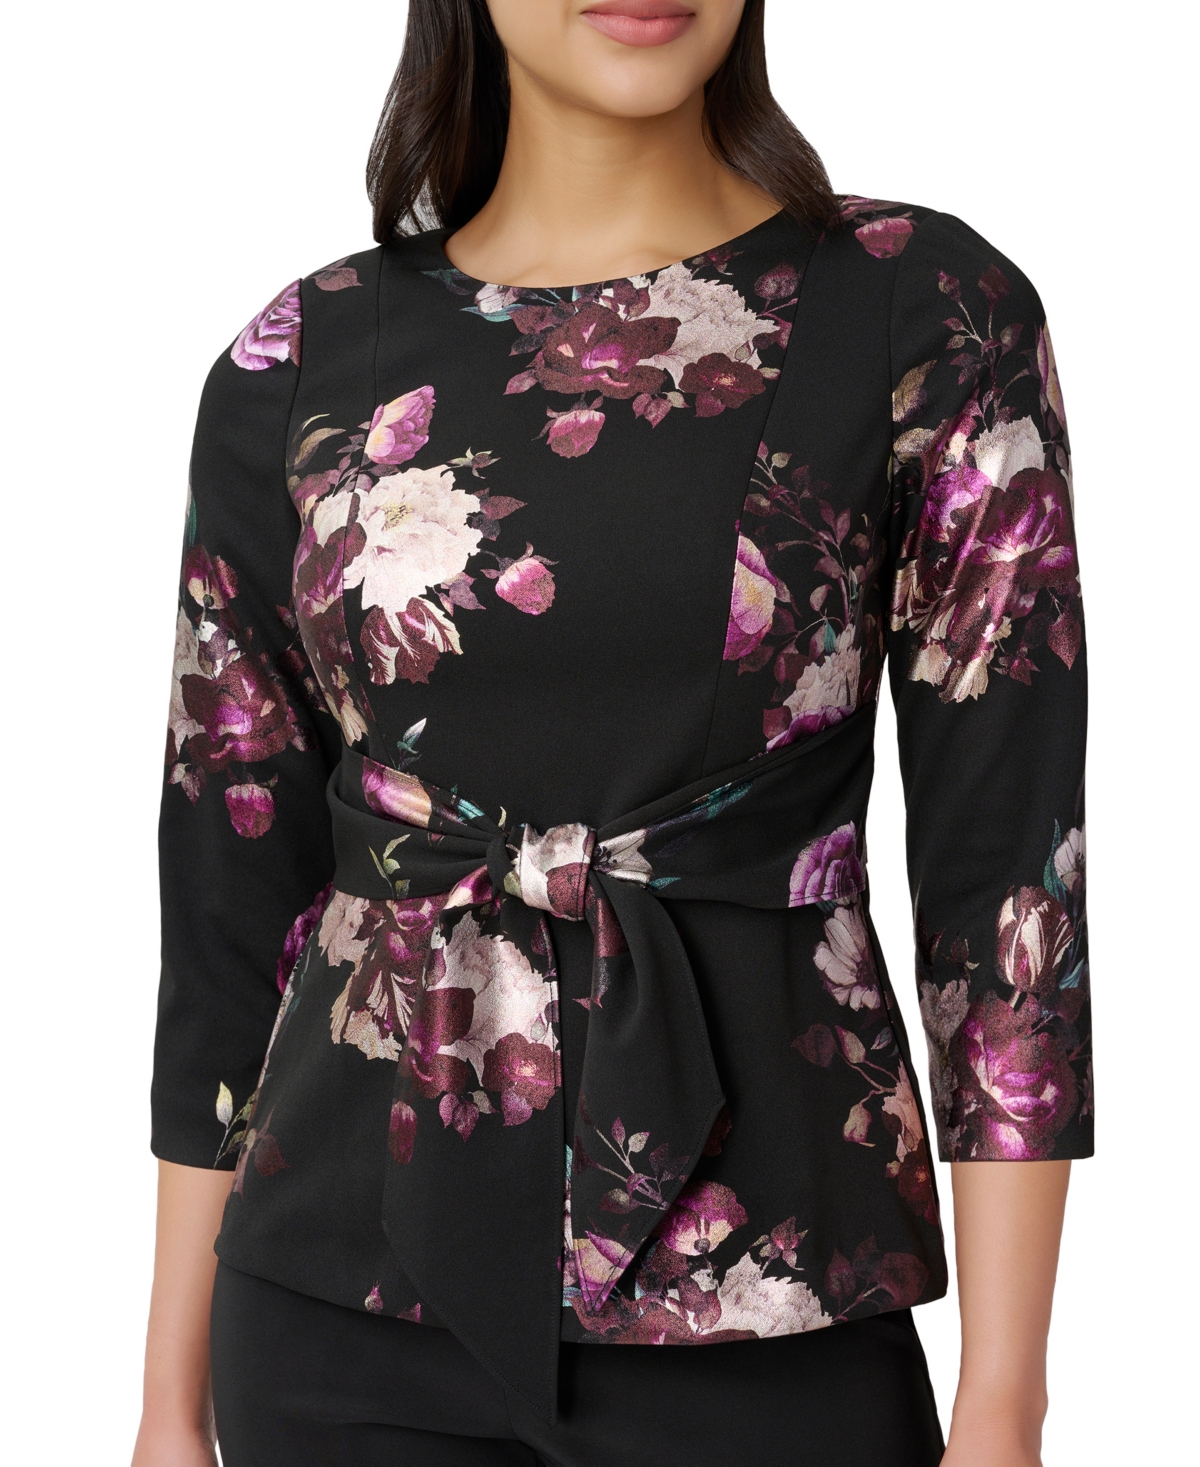  Adrianna Papell Women's Floral-Print 3/4-Sleeve Top